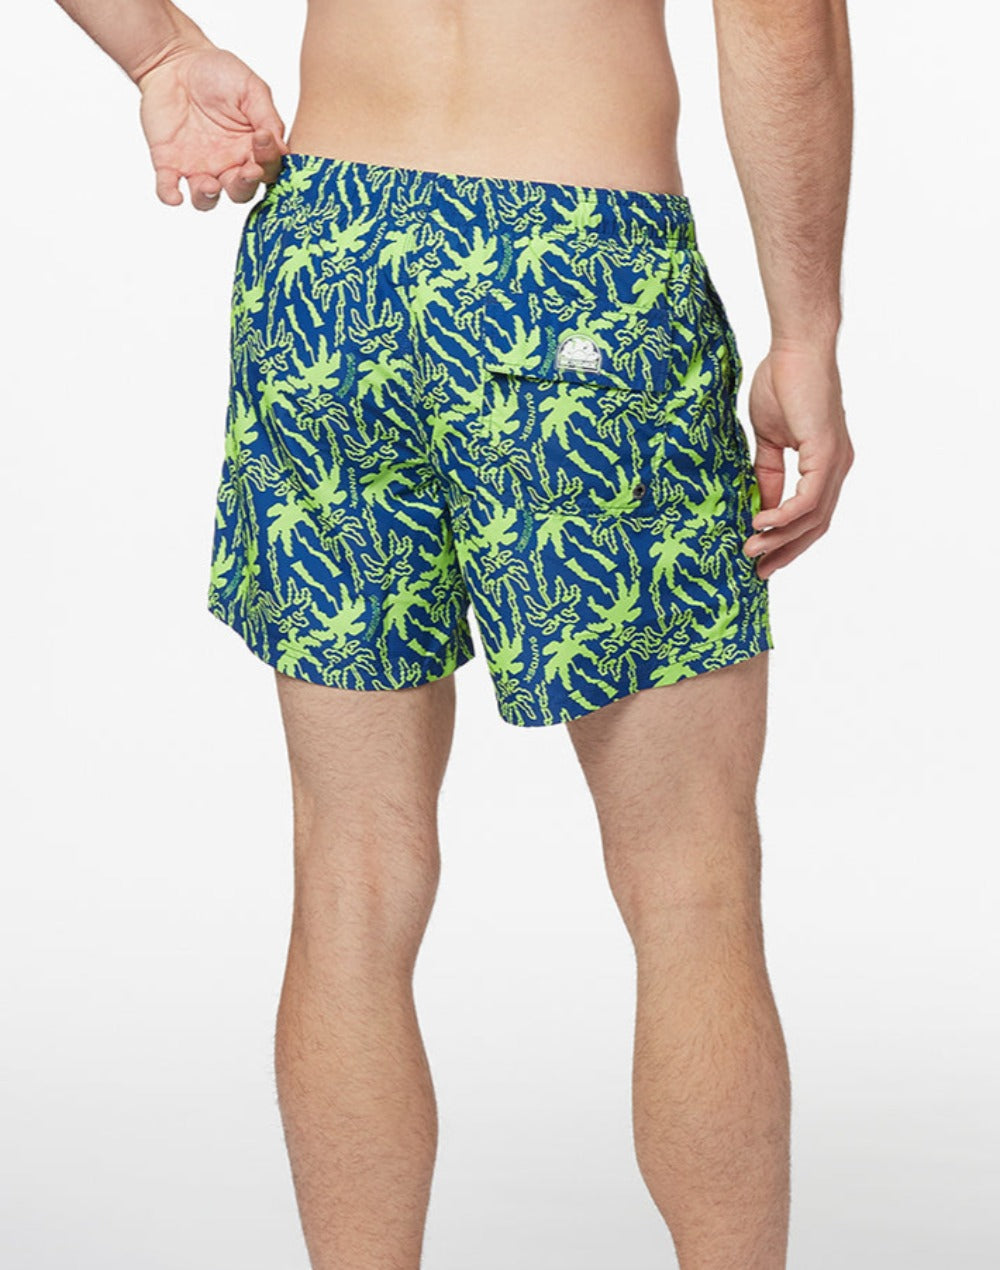 BOARDSHORT WITH ELASTICATED WAIST WITH FREAKY PALM PRINT